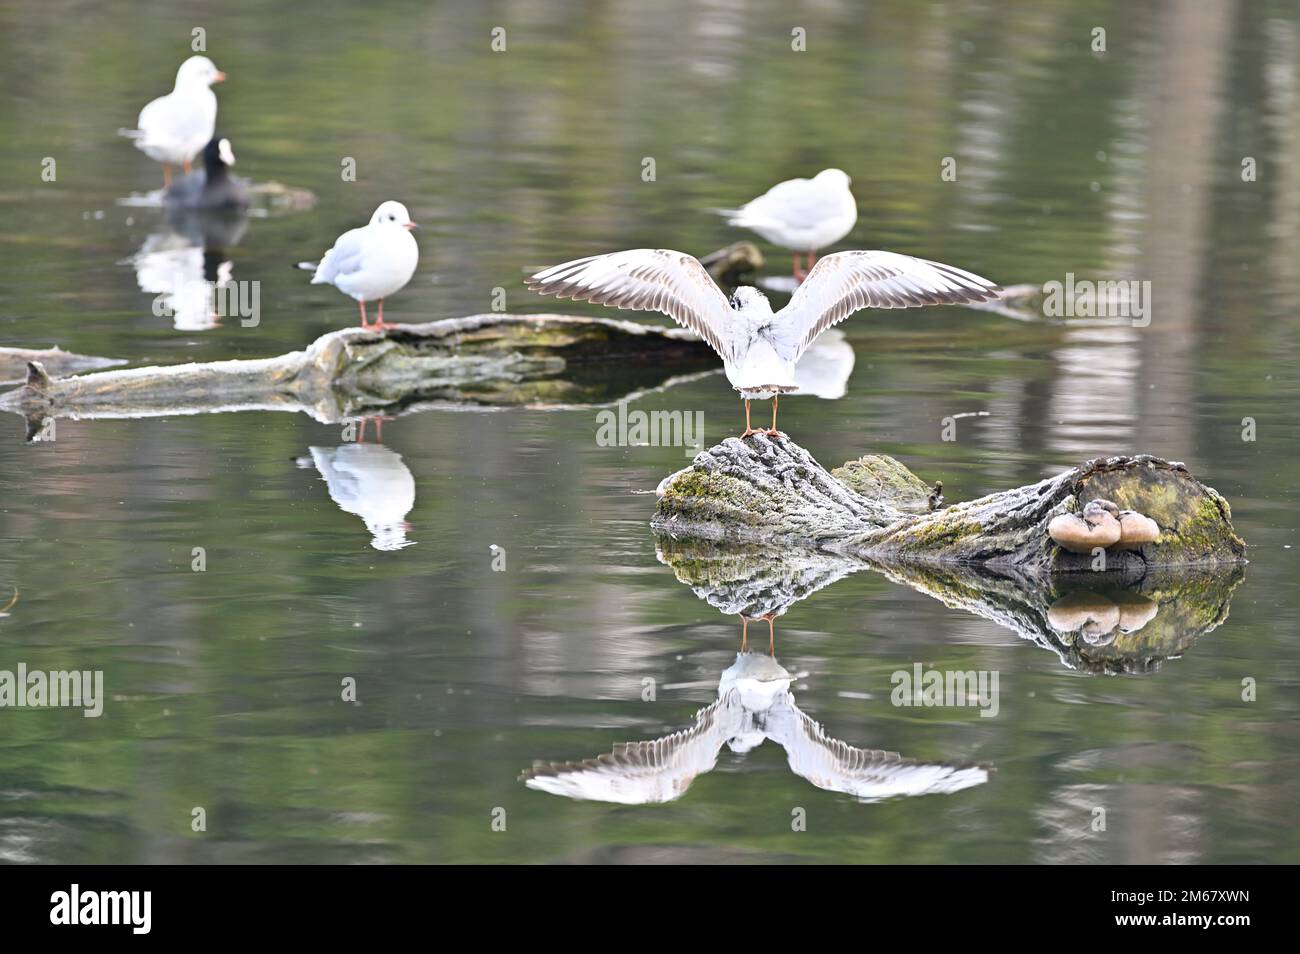 Vienna, Austria. Black-headed gulls in winter plumage (Chroicocephalus ridibundus) sit on a log and are reflected in the water Stock Photo